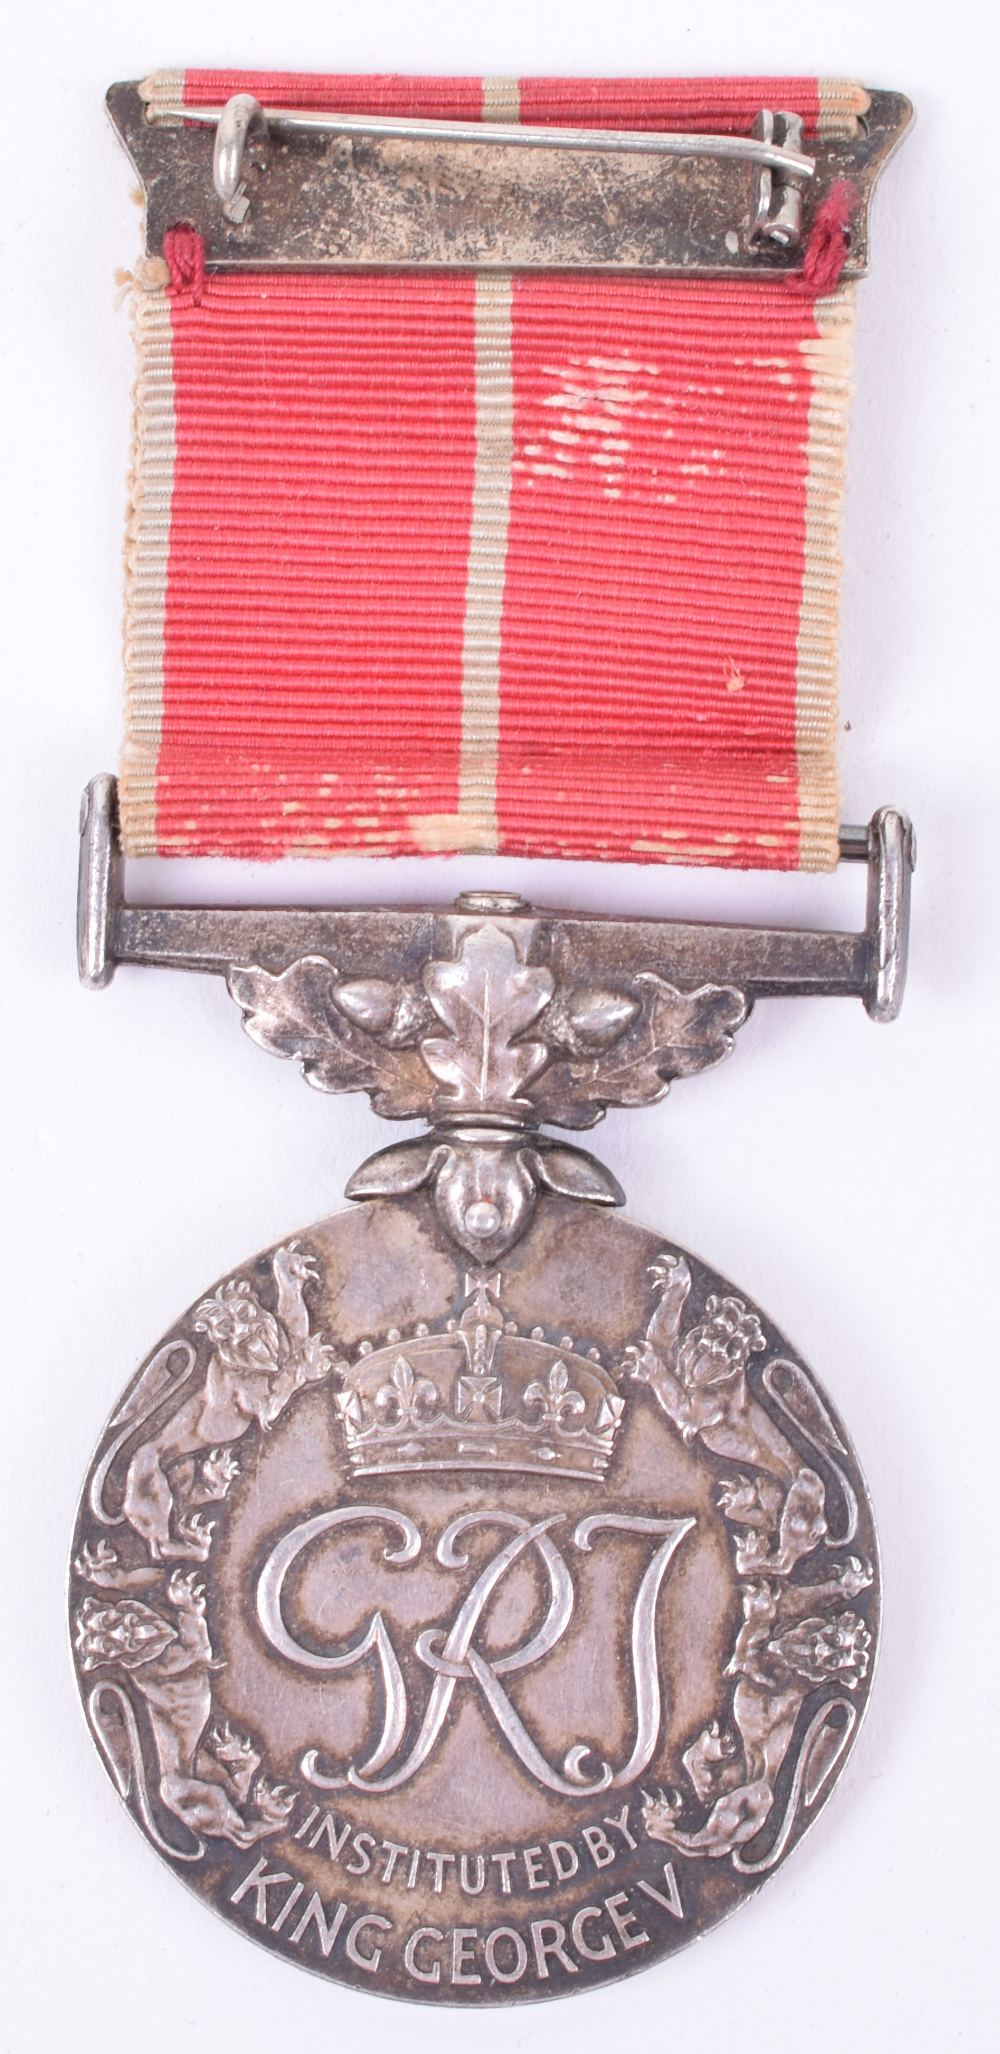 WW2 British Empire Medal Awarded to Chief Stoker William John Miller Royal Navy, For Saving a Mercha - Image 5 of 5